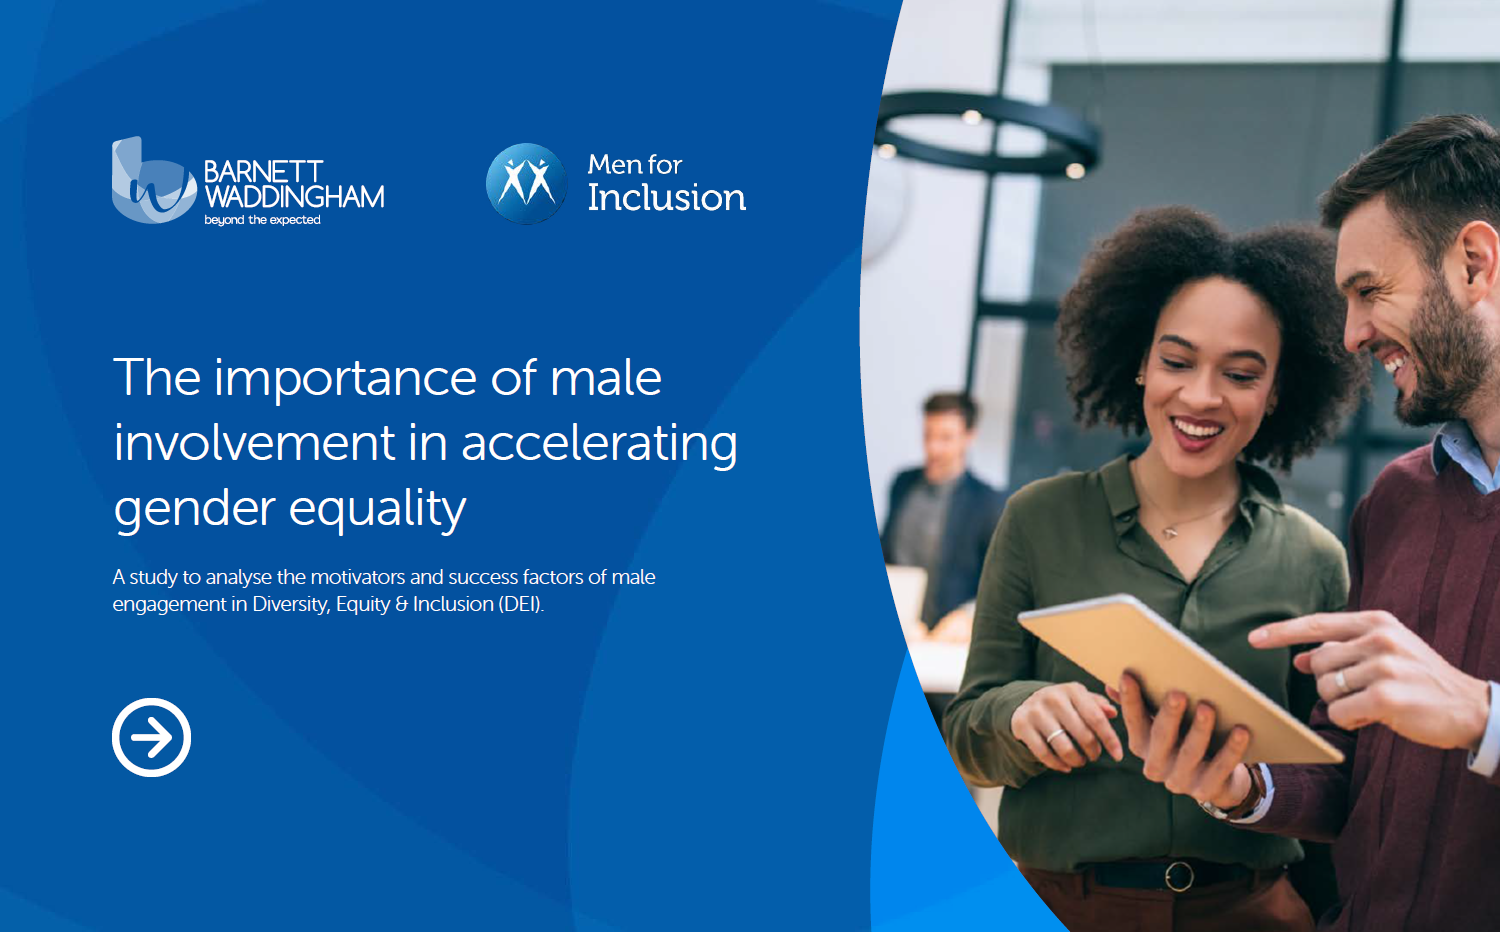 Men for Inclusion and Barnett Waddingham Launch Research Report Into The importance of male involvement in accelerating gender equality